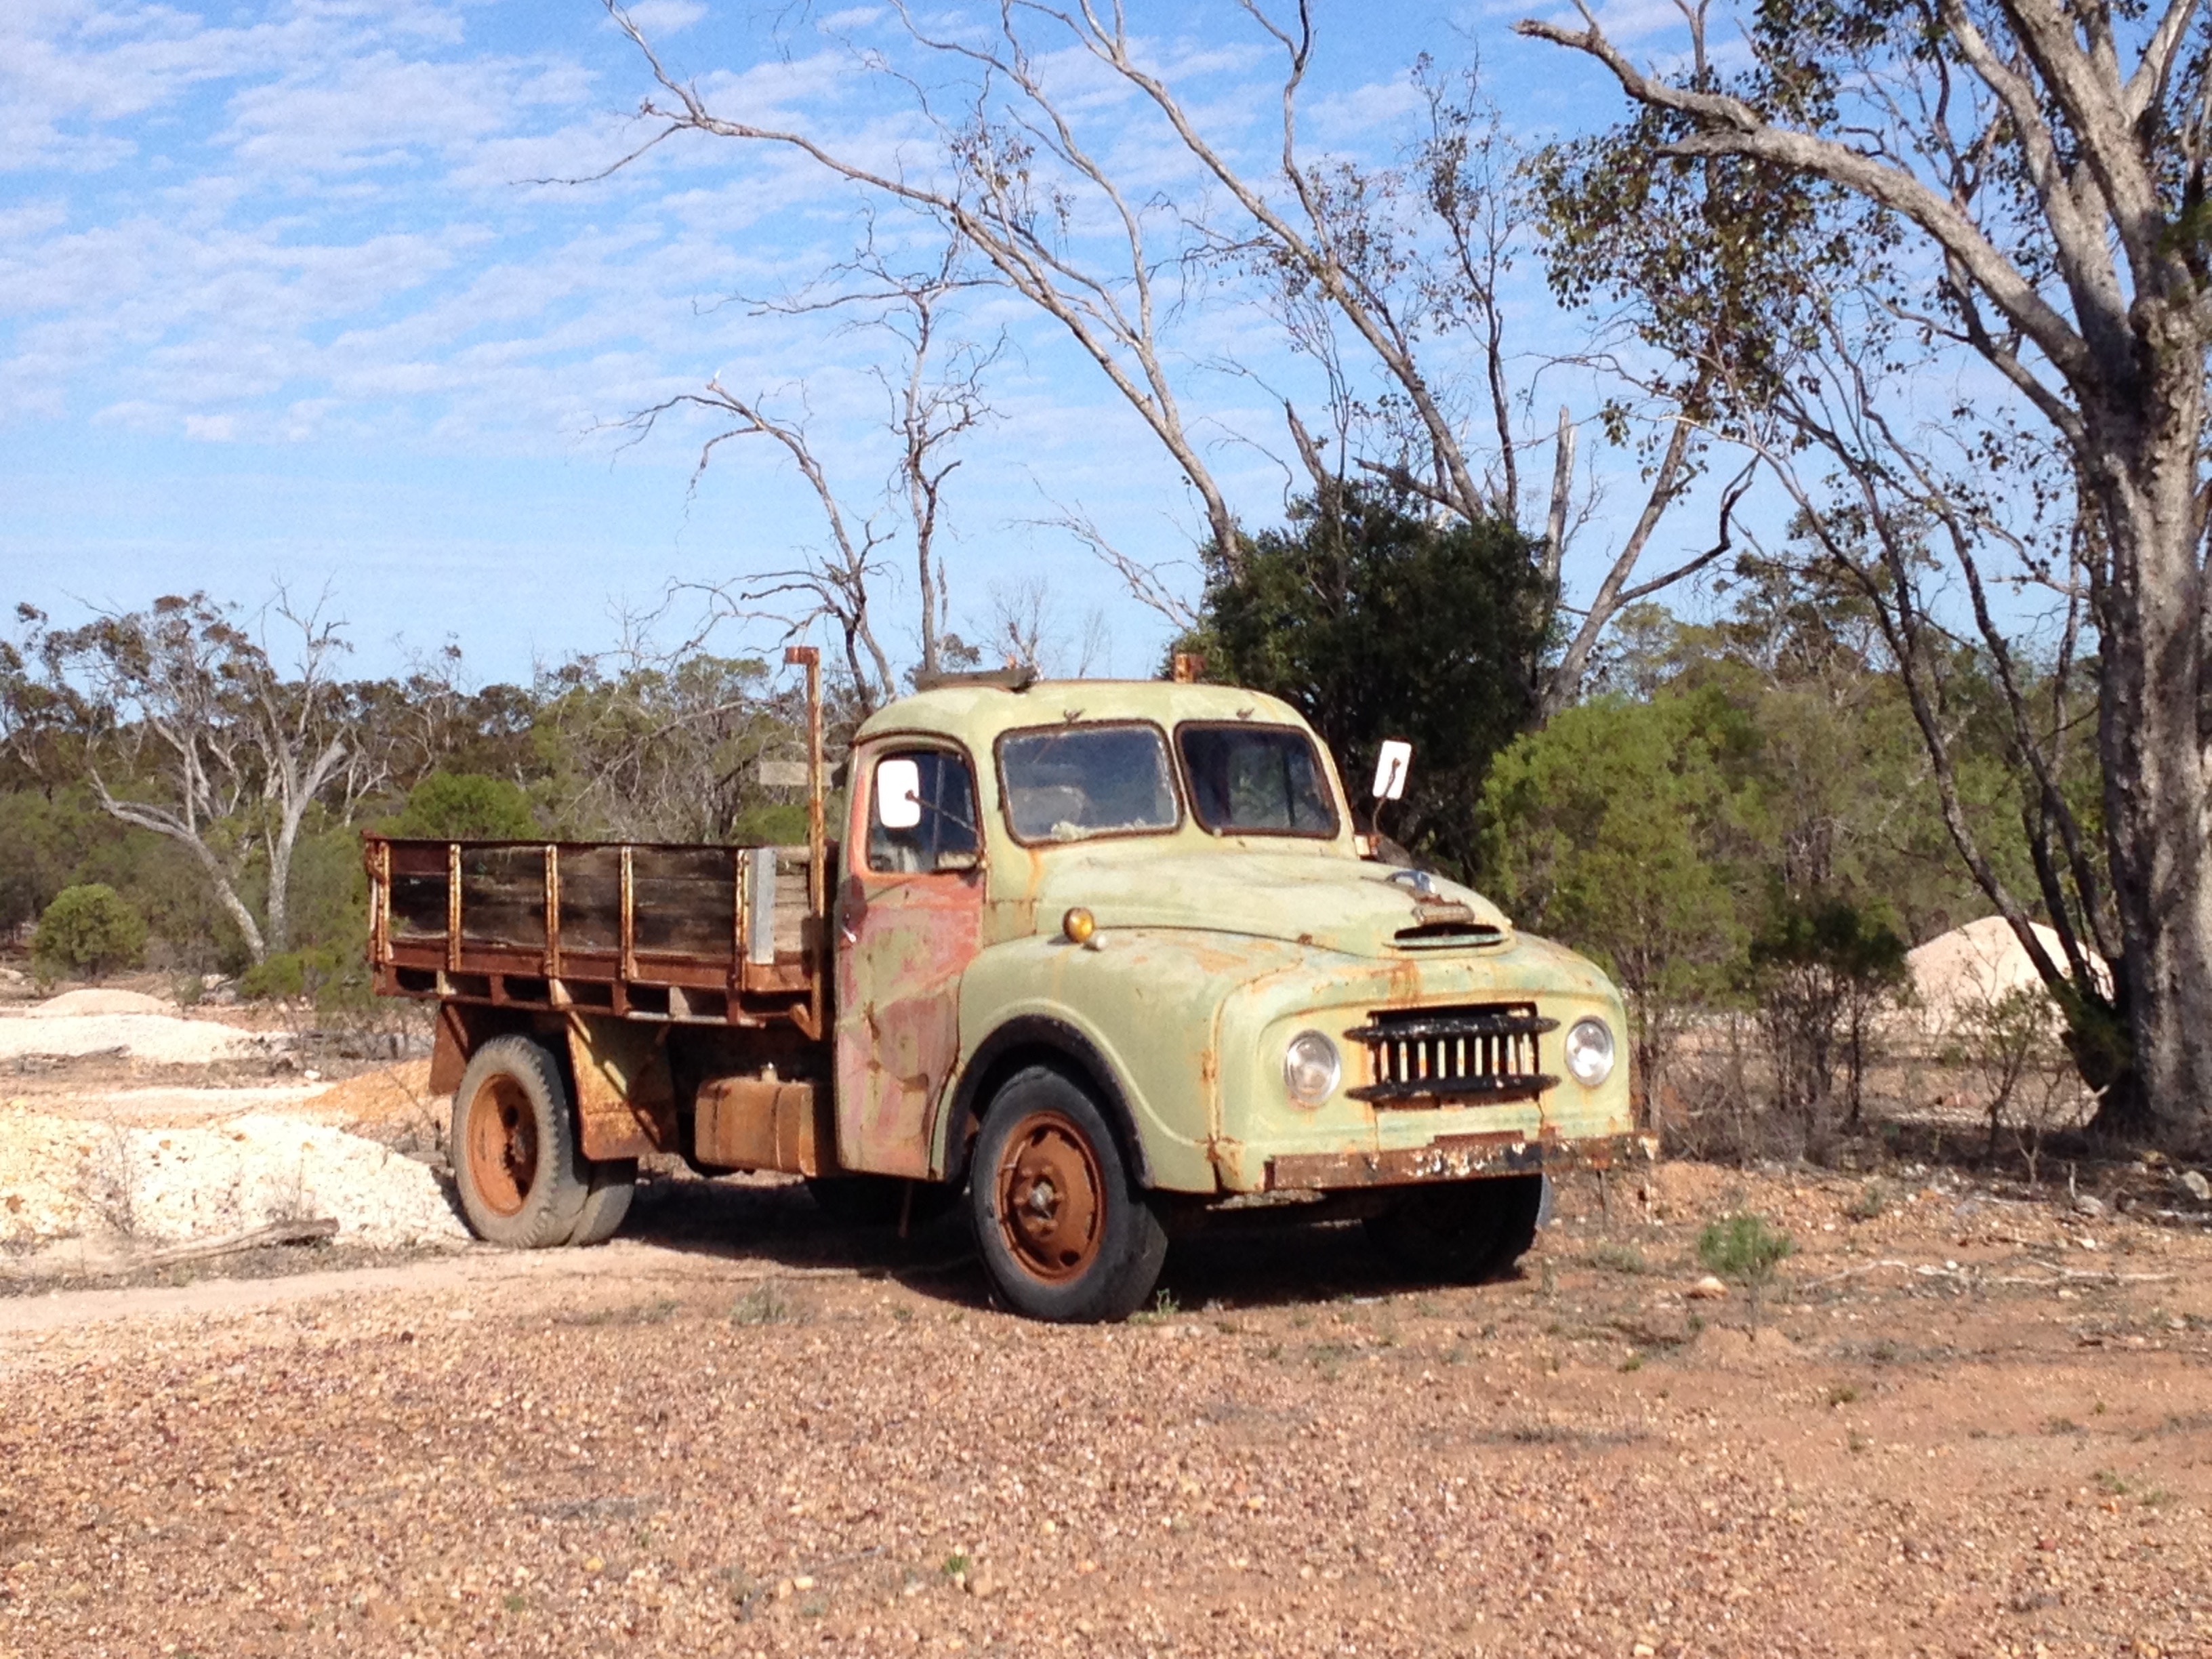 Another useful old truck